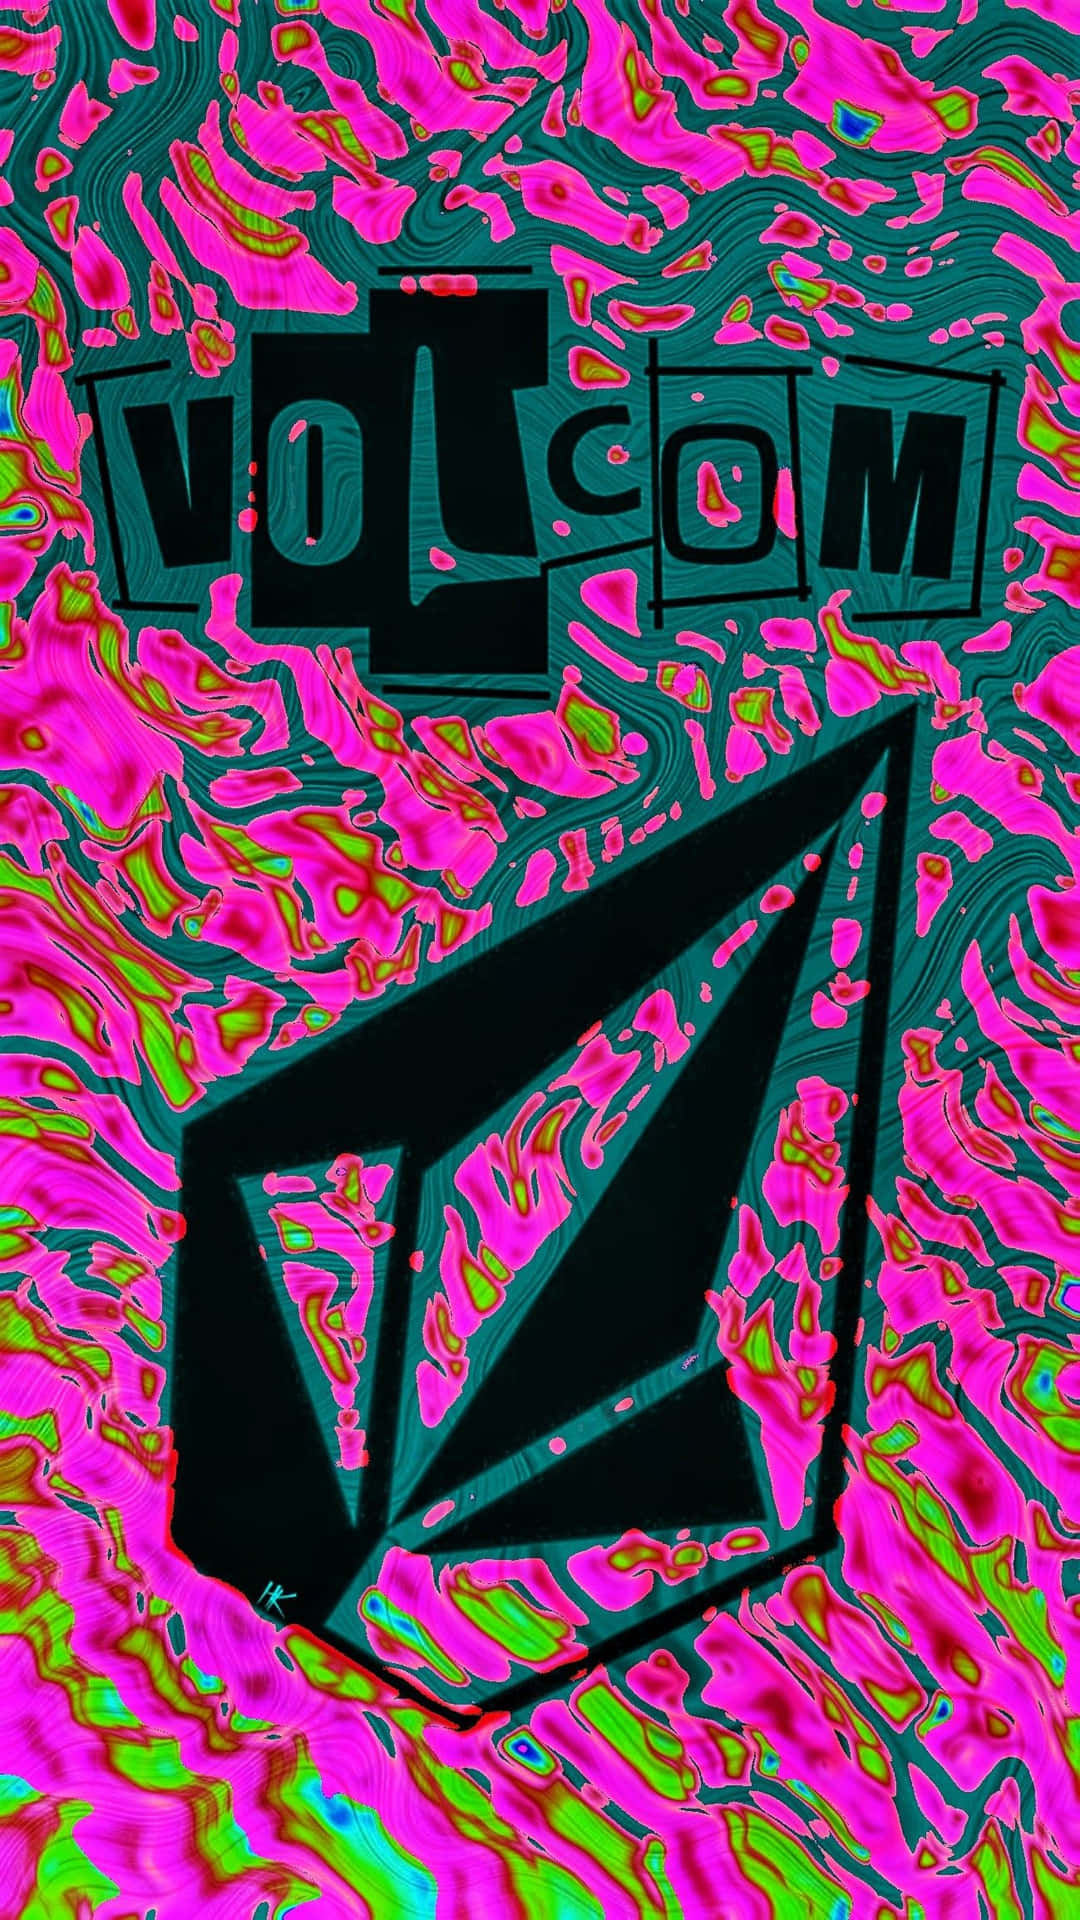 Volcom Logo Artistic Abstract Background Wallpaper